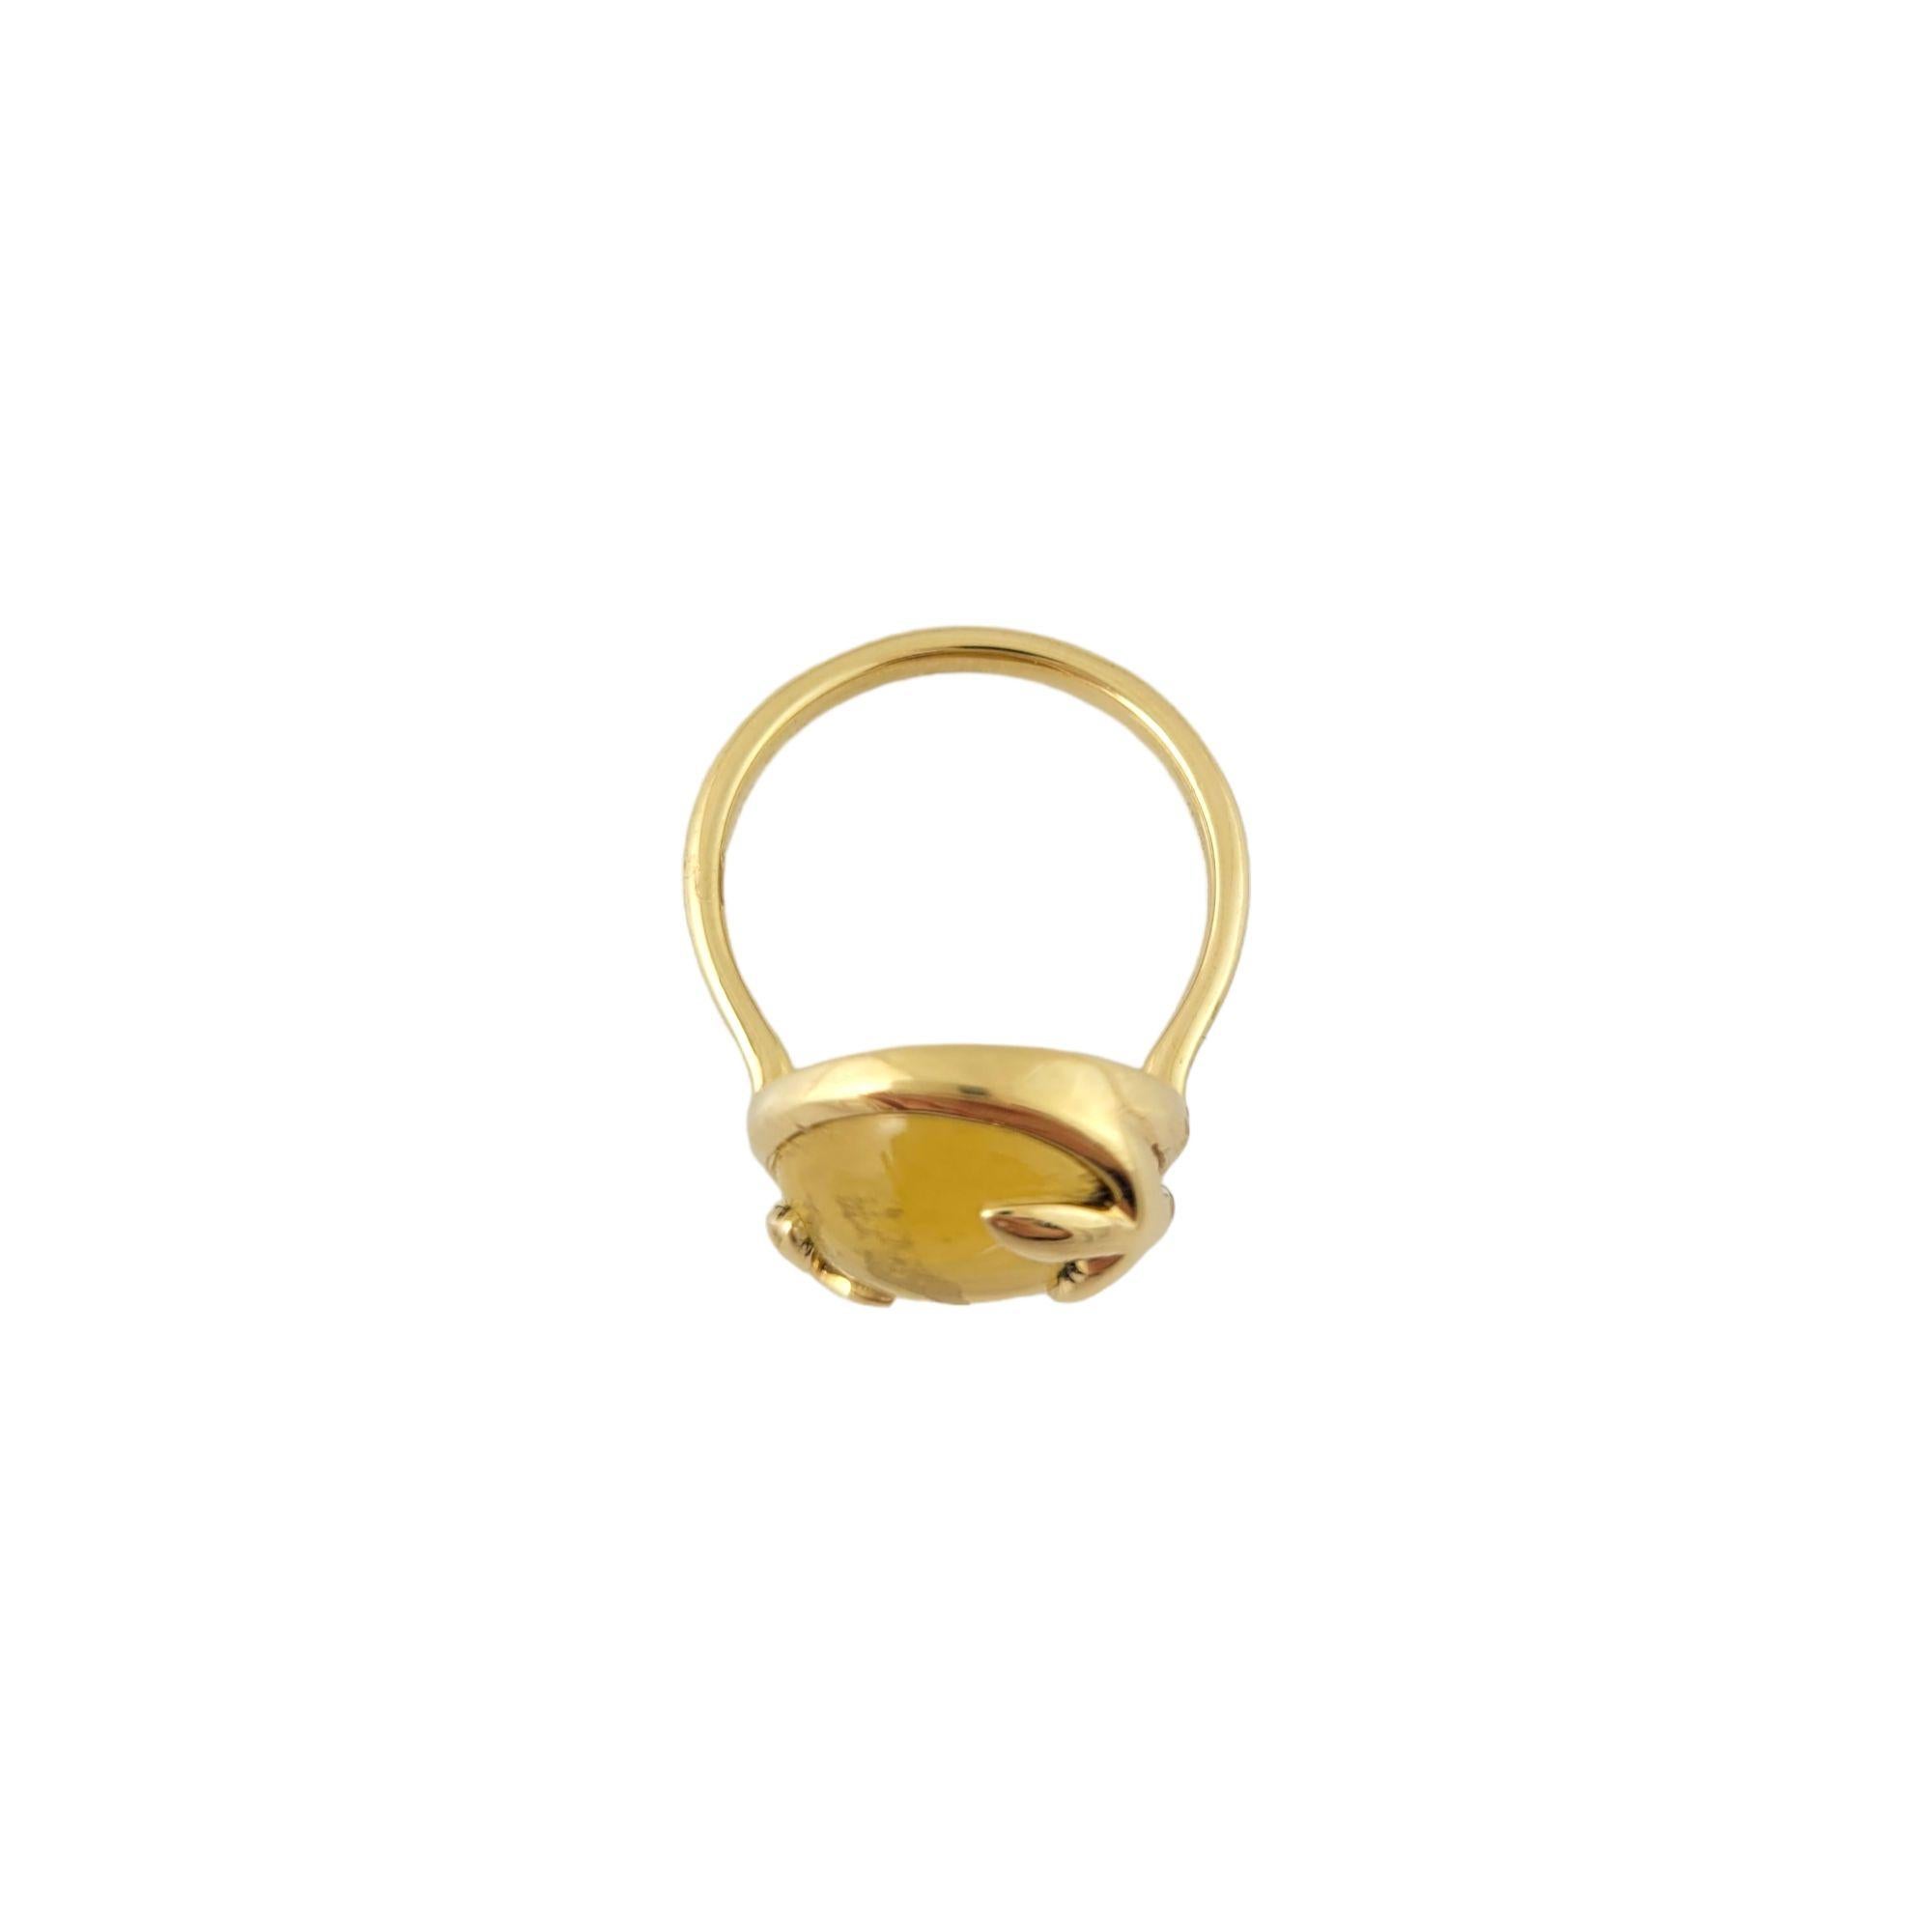 Tiffany & Co. Paloma Picasso 18k Yellow Gold and Citrine Olive Leaf Ring 2